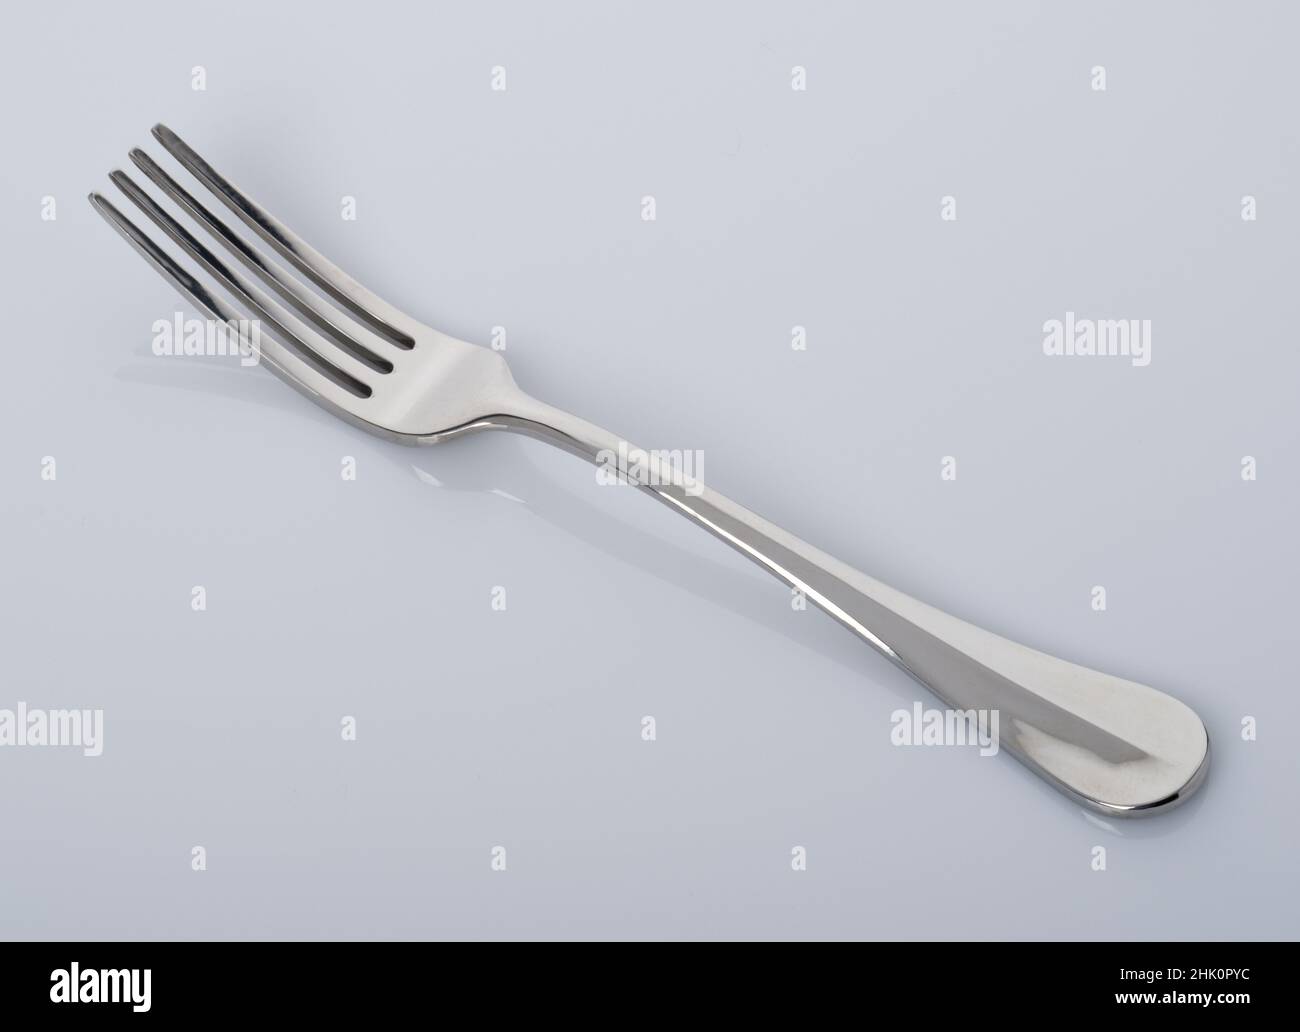 A table fork. A silver plated metal fork. Stock Photo